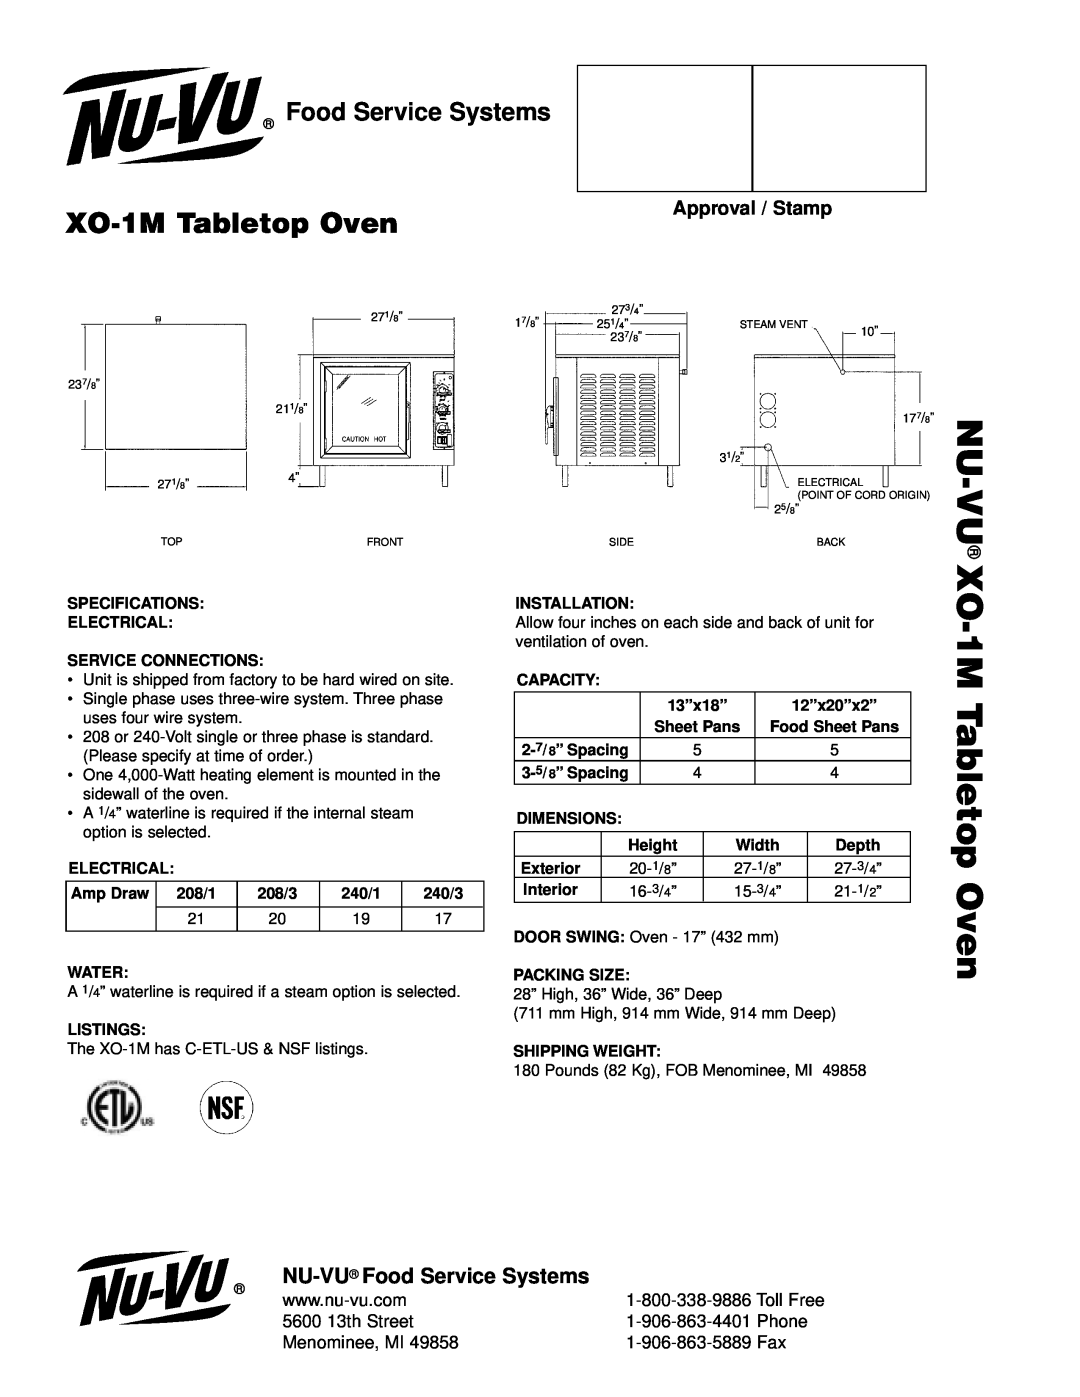 Middleby Cooking Systems Group manual NU-VU XO-1MTabletop Oven, NU-VU Food Service Systems, Approval / Stamp, Phone 